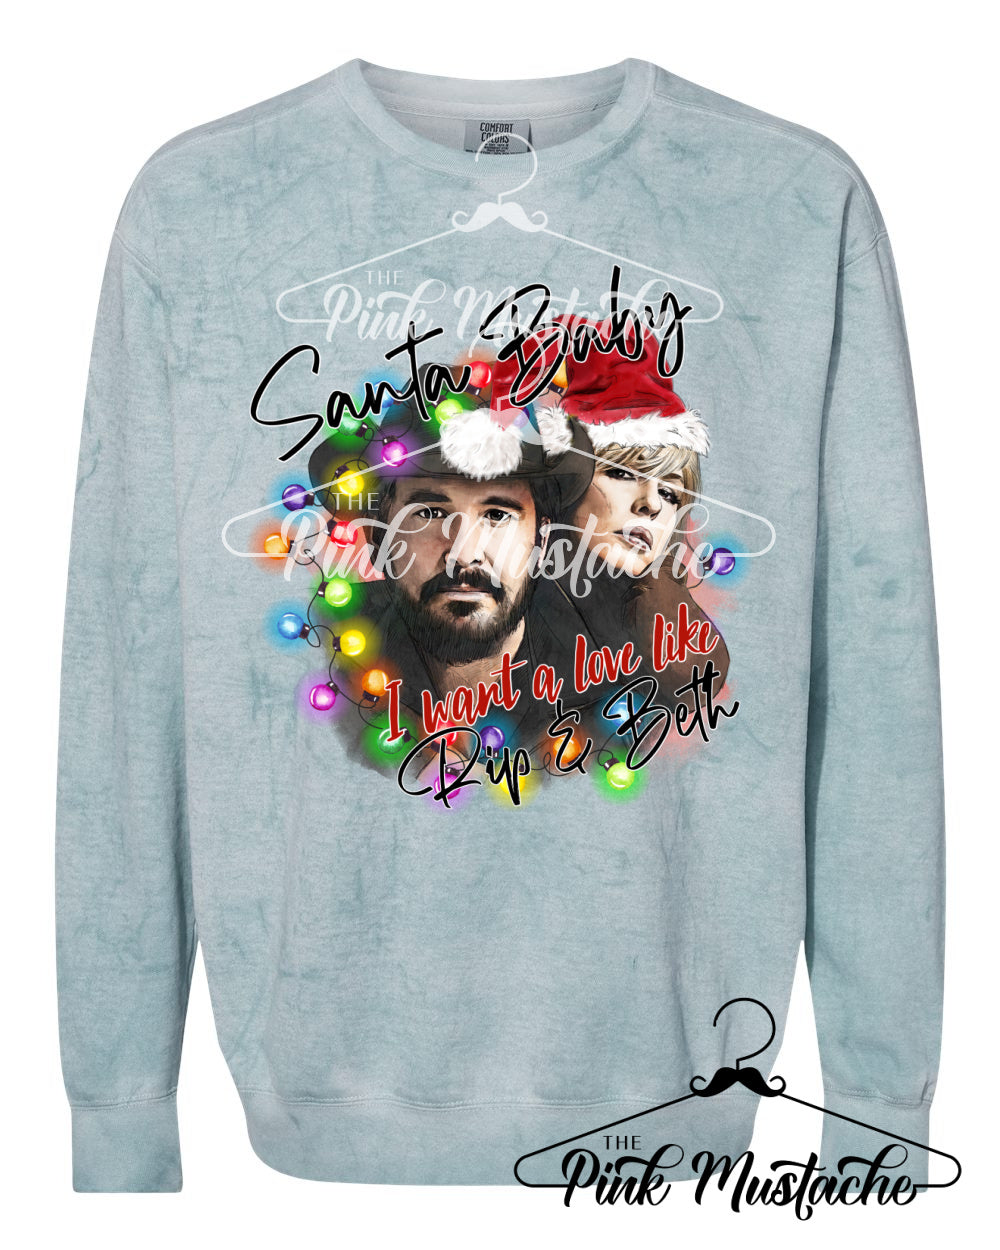 Comfort Colors Colorblast Christmas Sweatshirt Love Like Western - Sizes and Inventory Limited